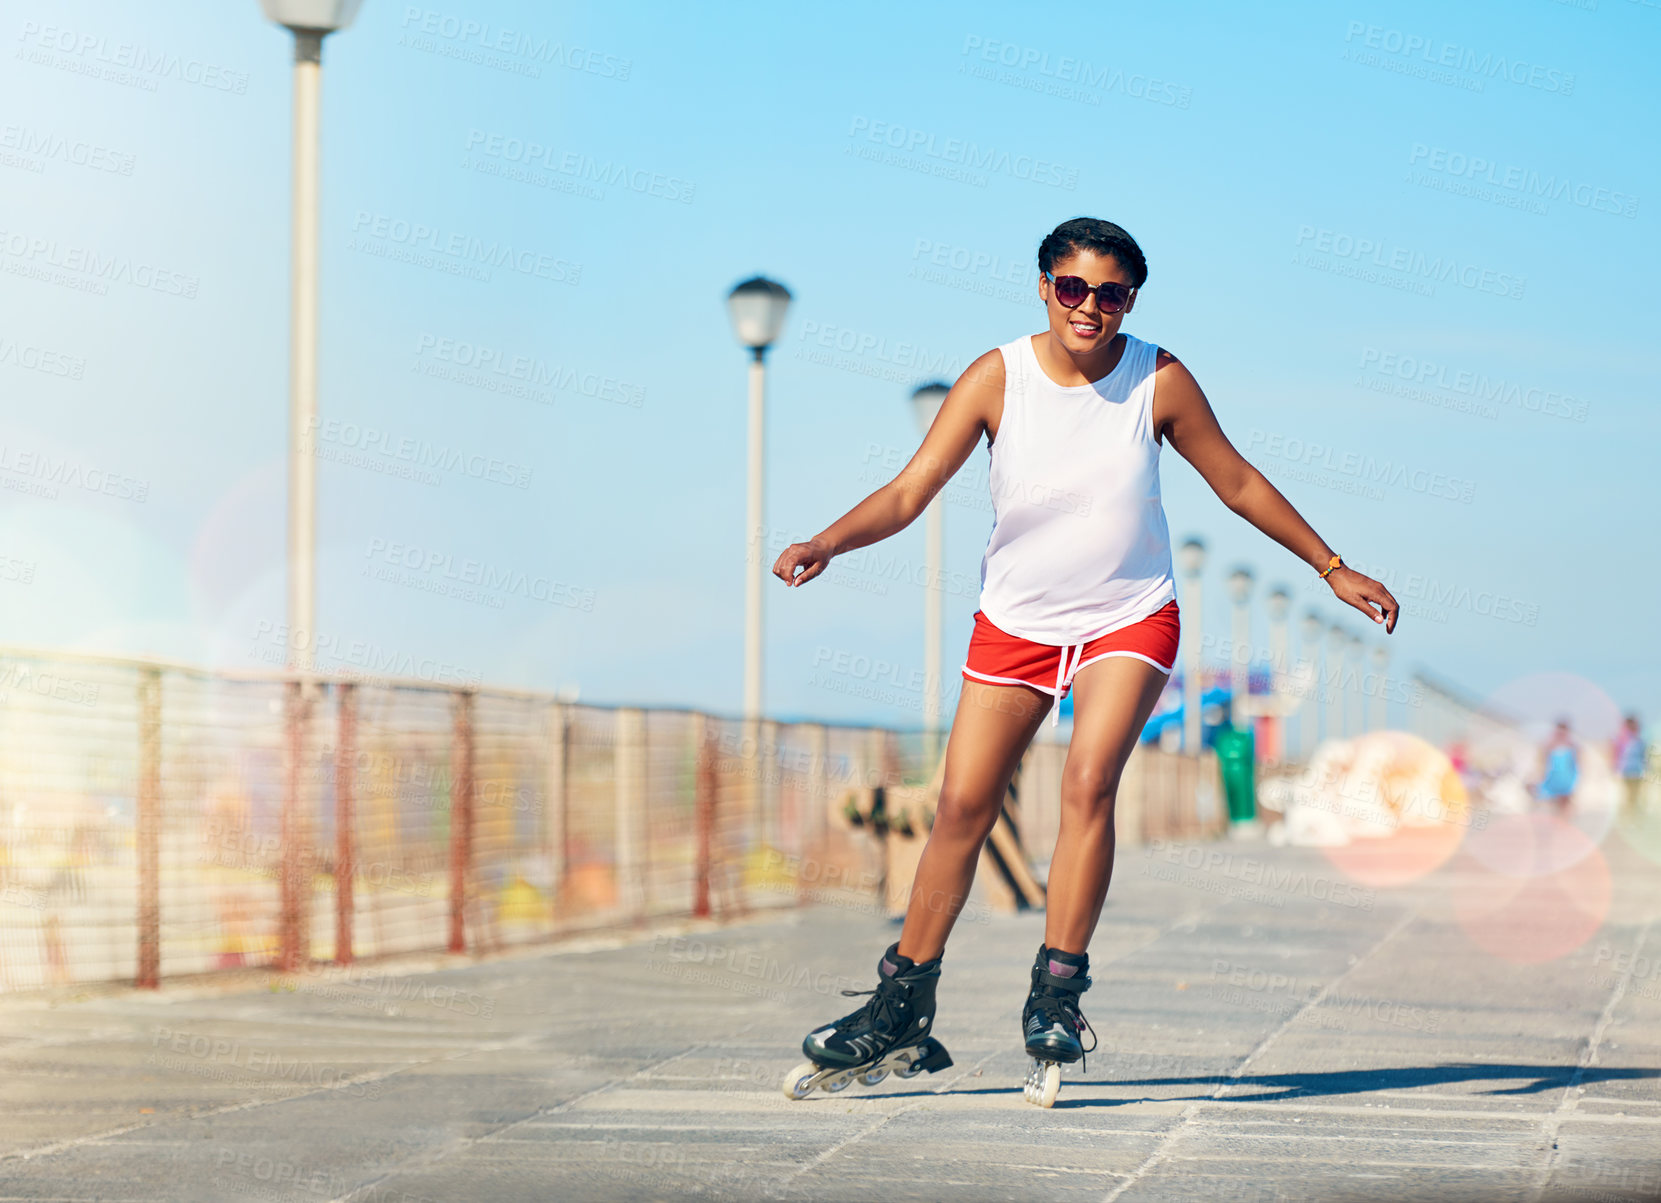 Buy stock photo Shot of an attractive young woman rollerblading on a boardwalk